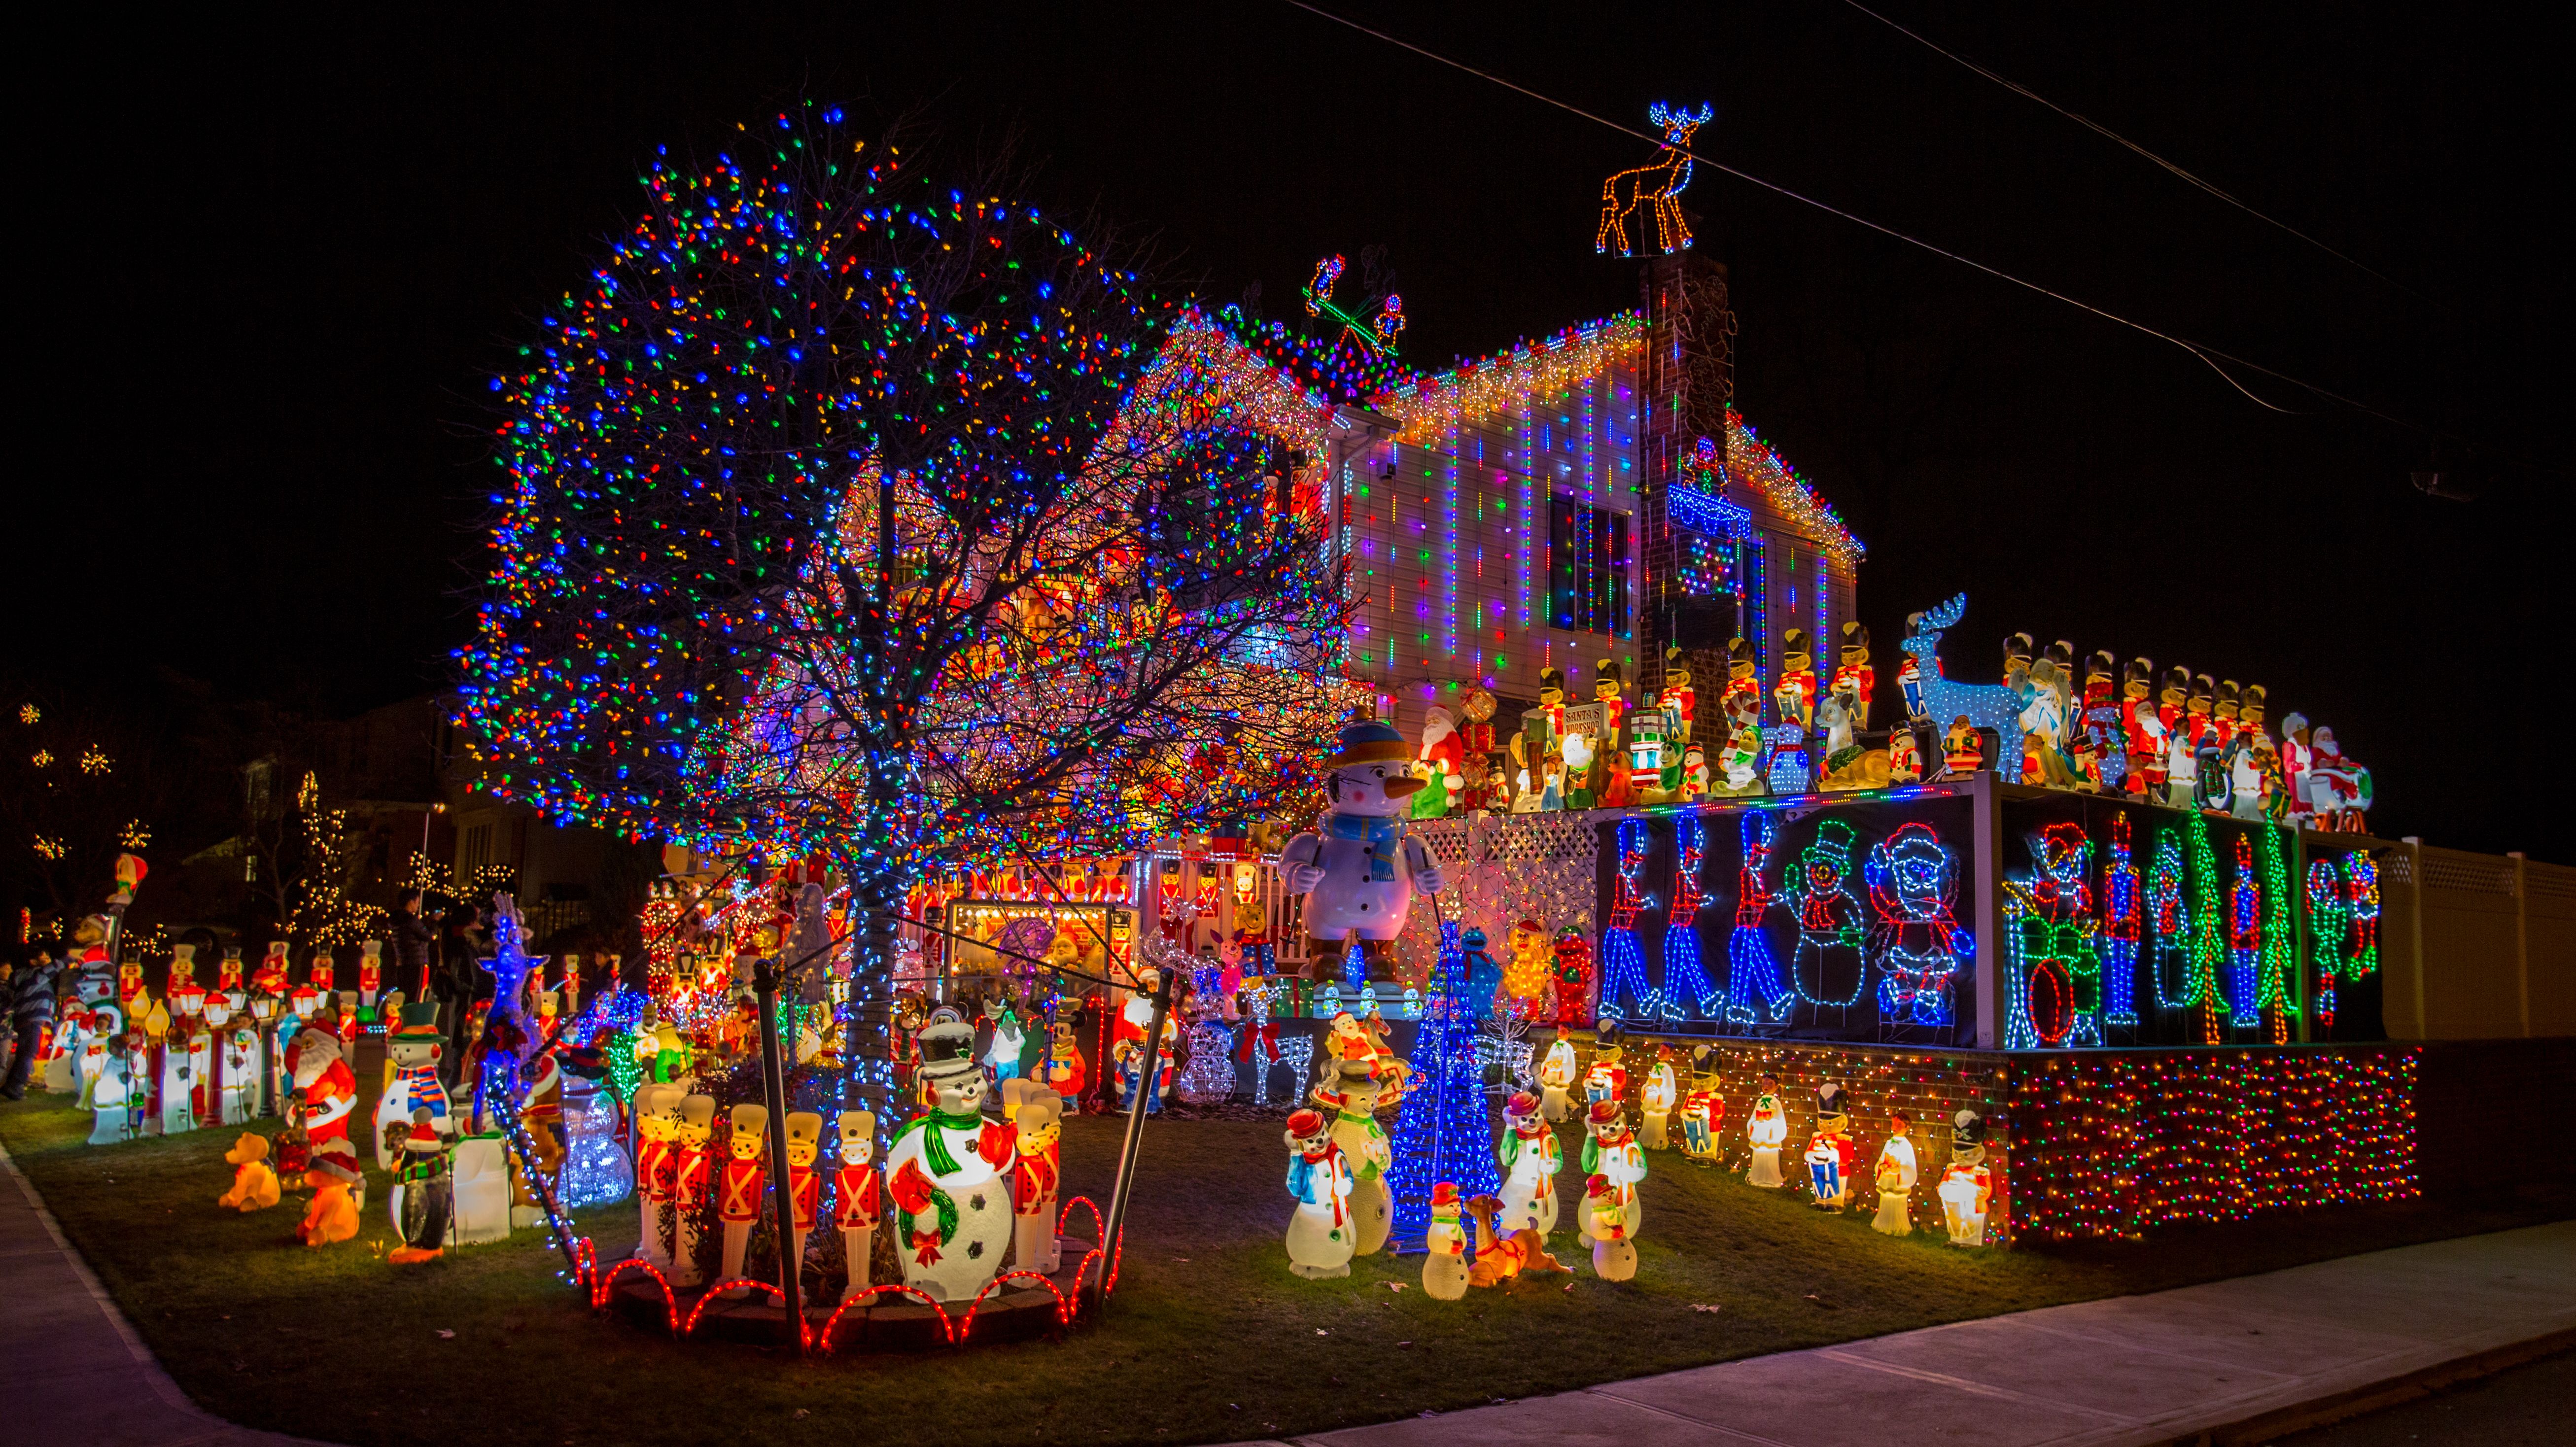 Star Wars-themed light show and other Christmas magic